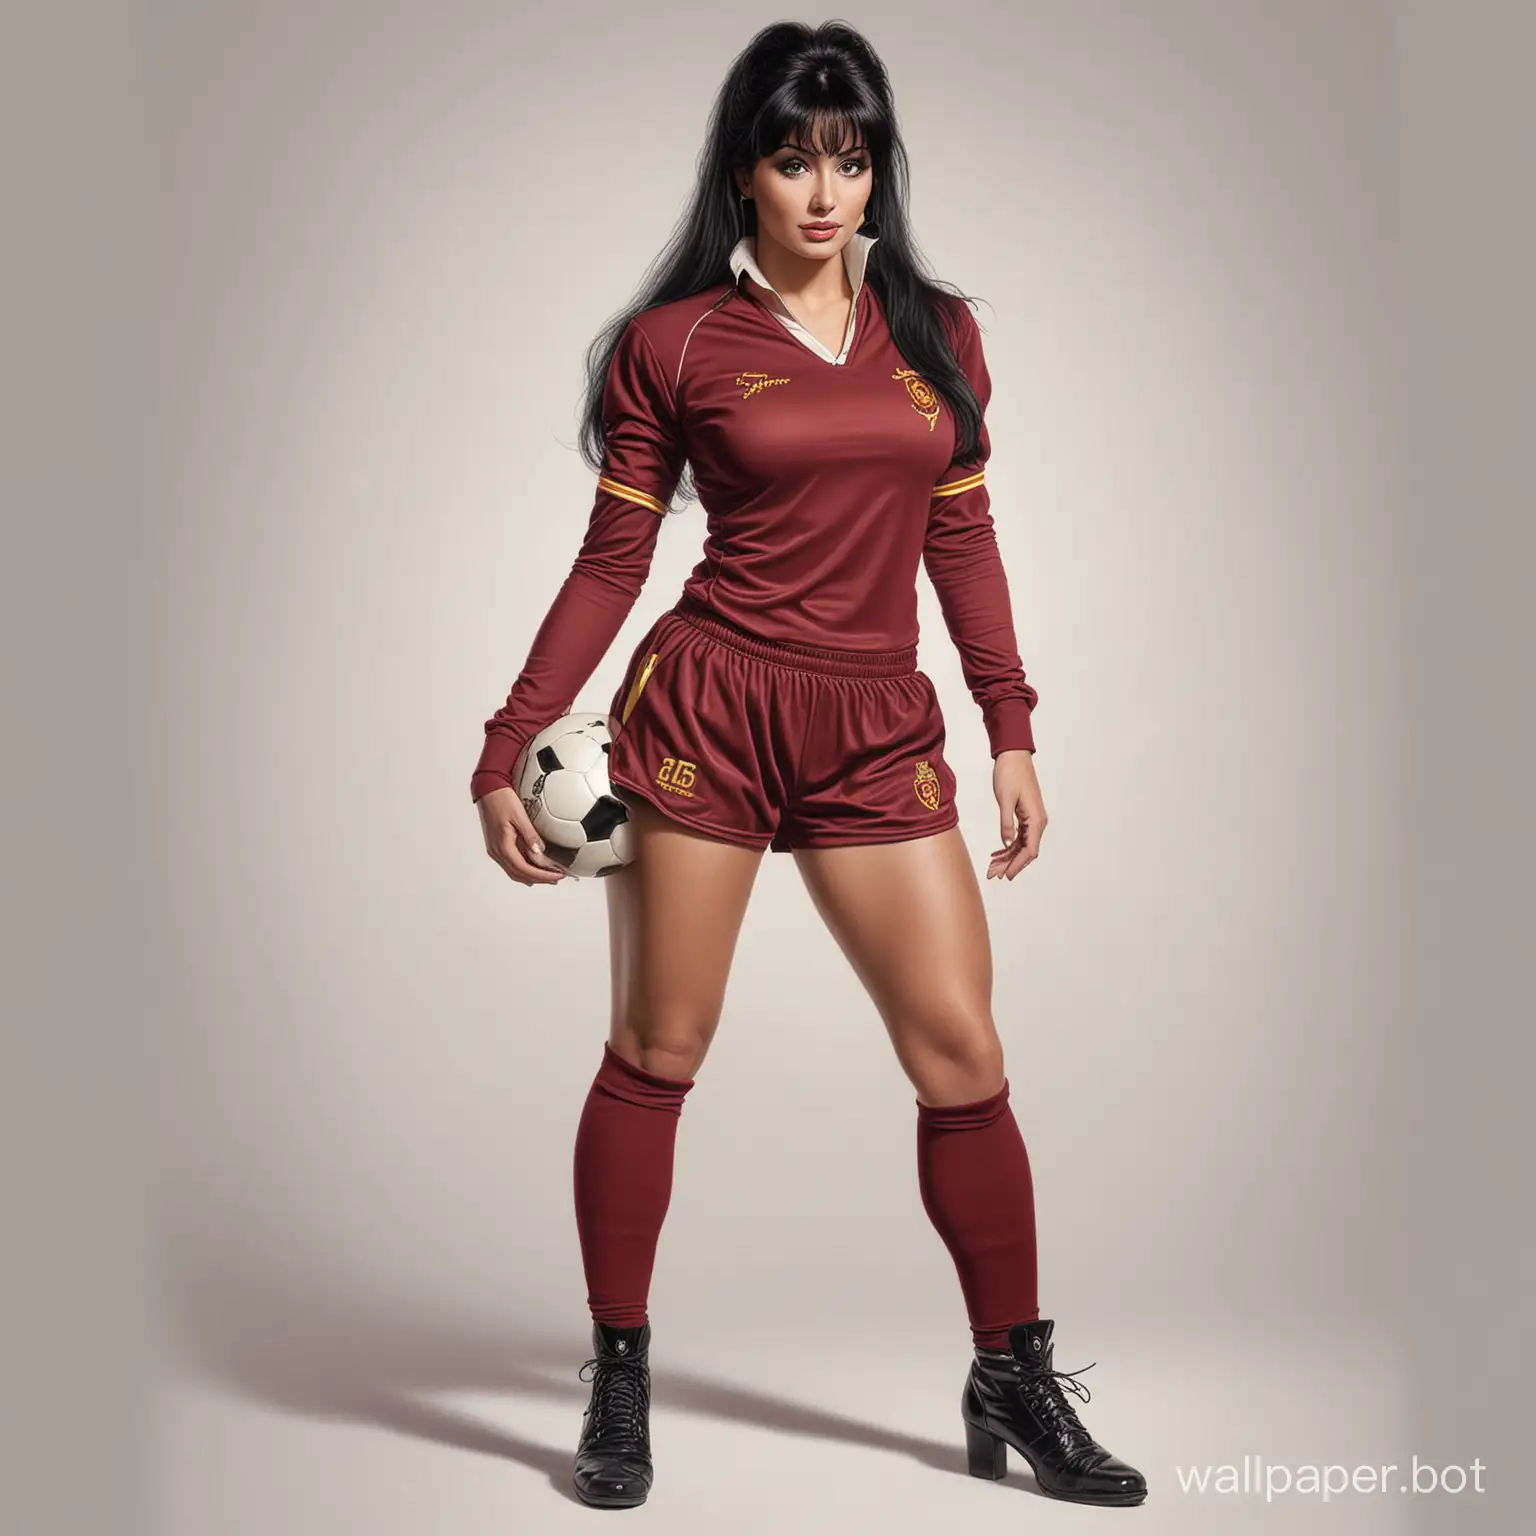 Sketch 'Elvira' 25 years old, dark hair, size 4 breasts, narrow waist, in a burgundy soccer uniform, on a white background, white background, highly realistic masterpiece, style of Boris Vallejo, portrait 16K.